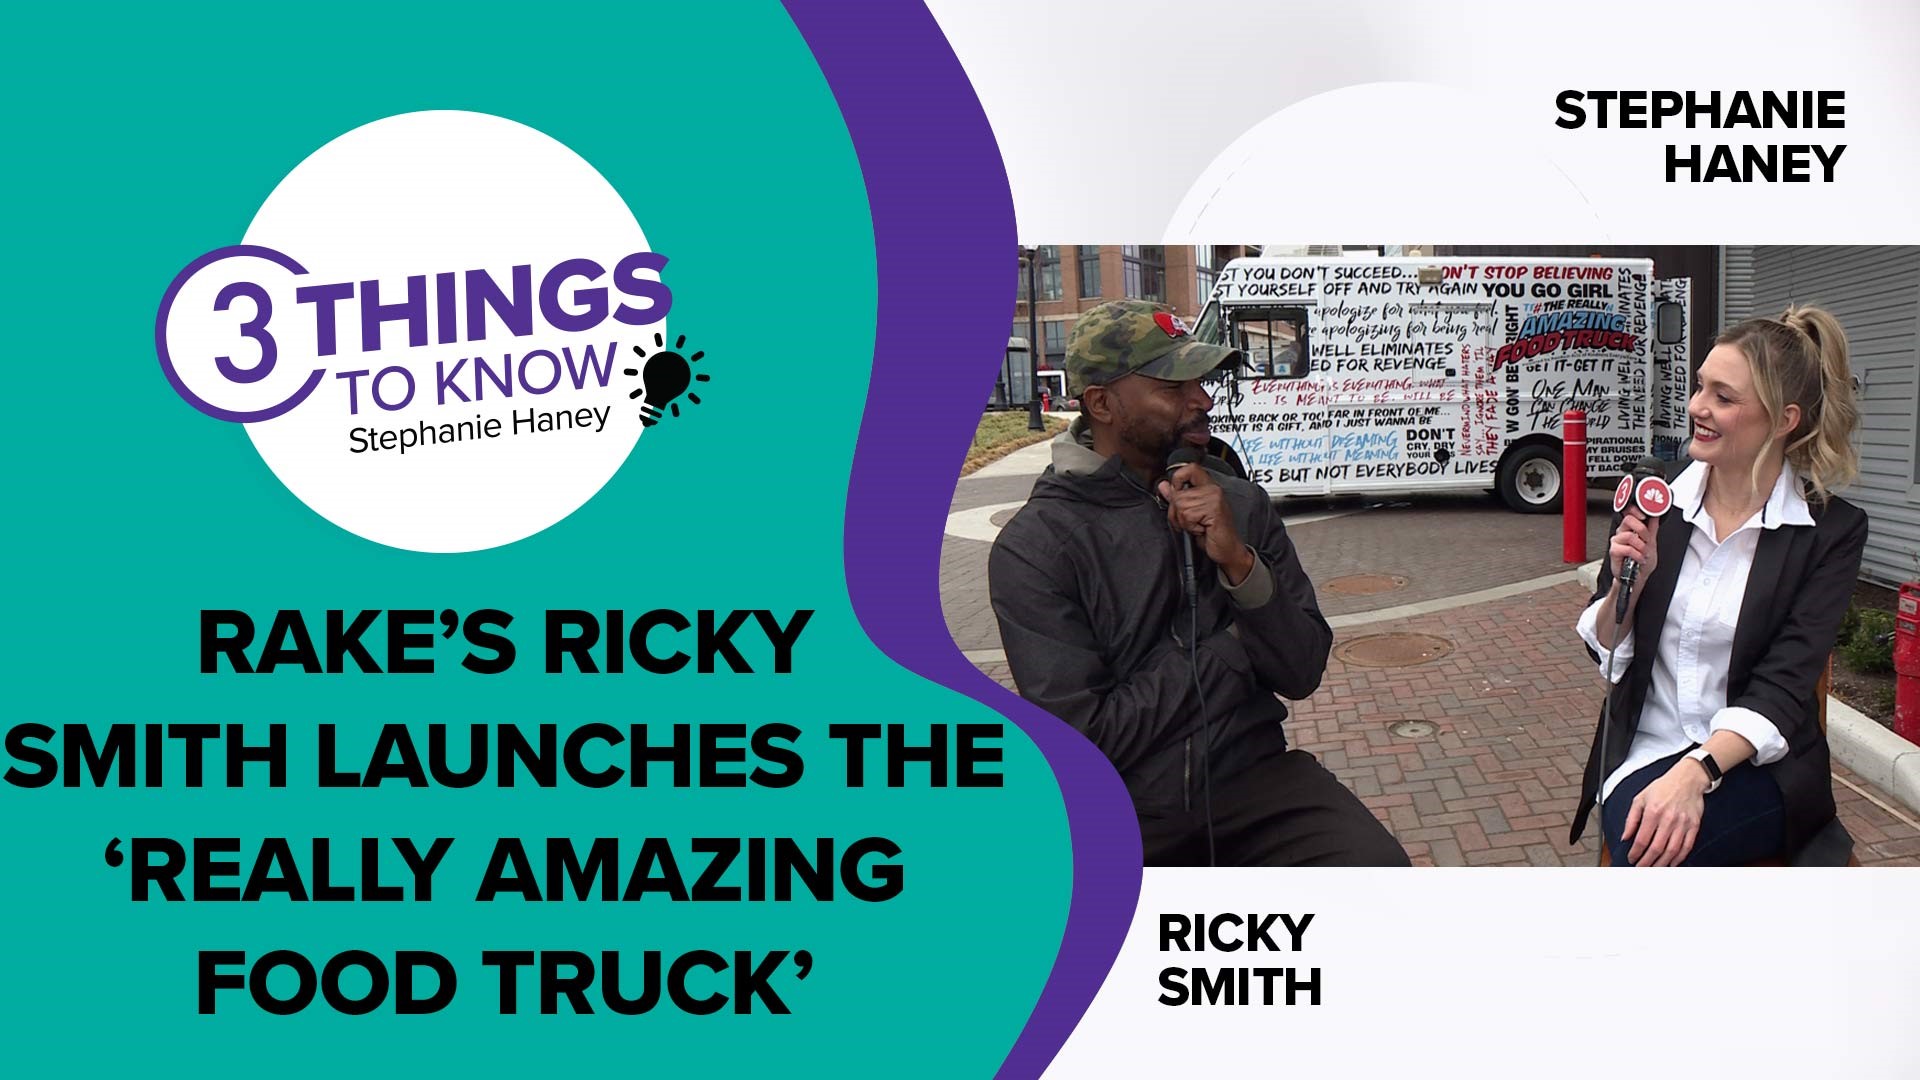 RAKE founder Ricky Smith comes back on location at Welcome to the Farm in the Flats to celebrate the launch of his Really Amazing Food Truck, 14 years in the making